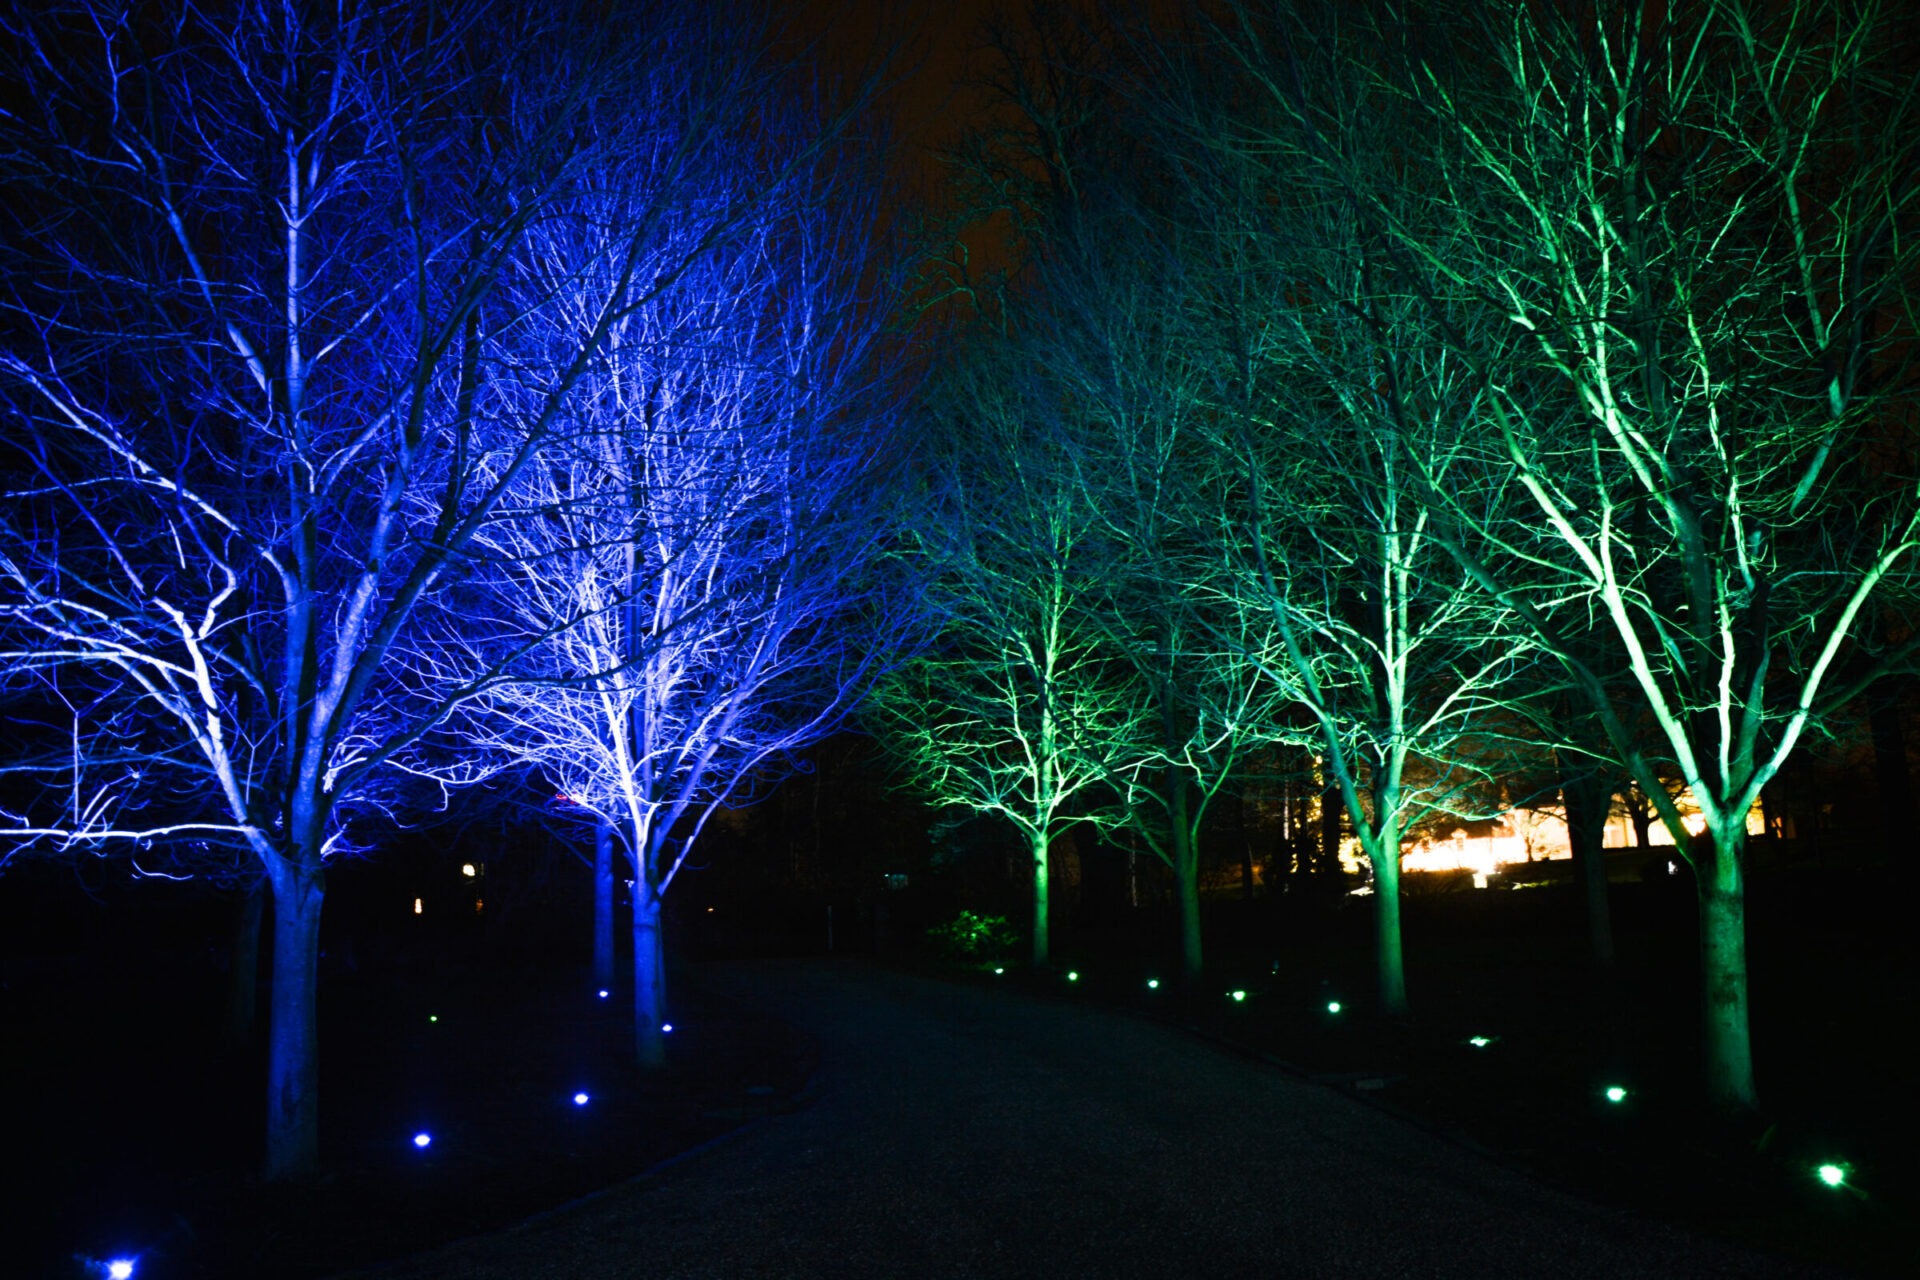 The image shows a row of trees illuminated with blue and green lights at night, creating a magical and enchanting atmosphere along a path.